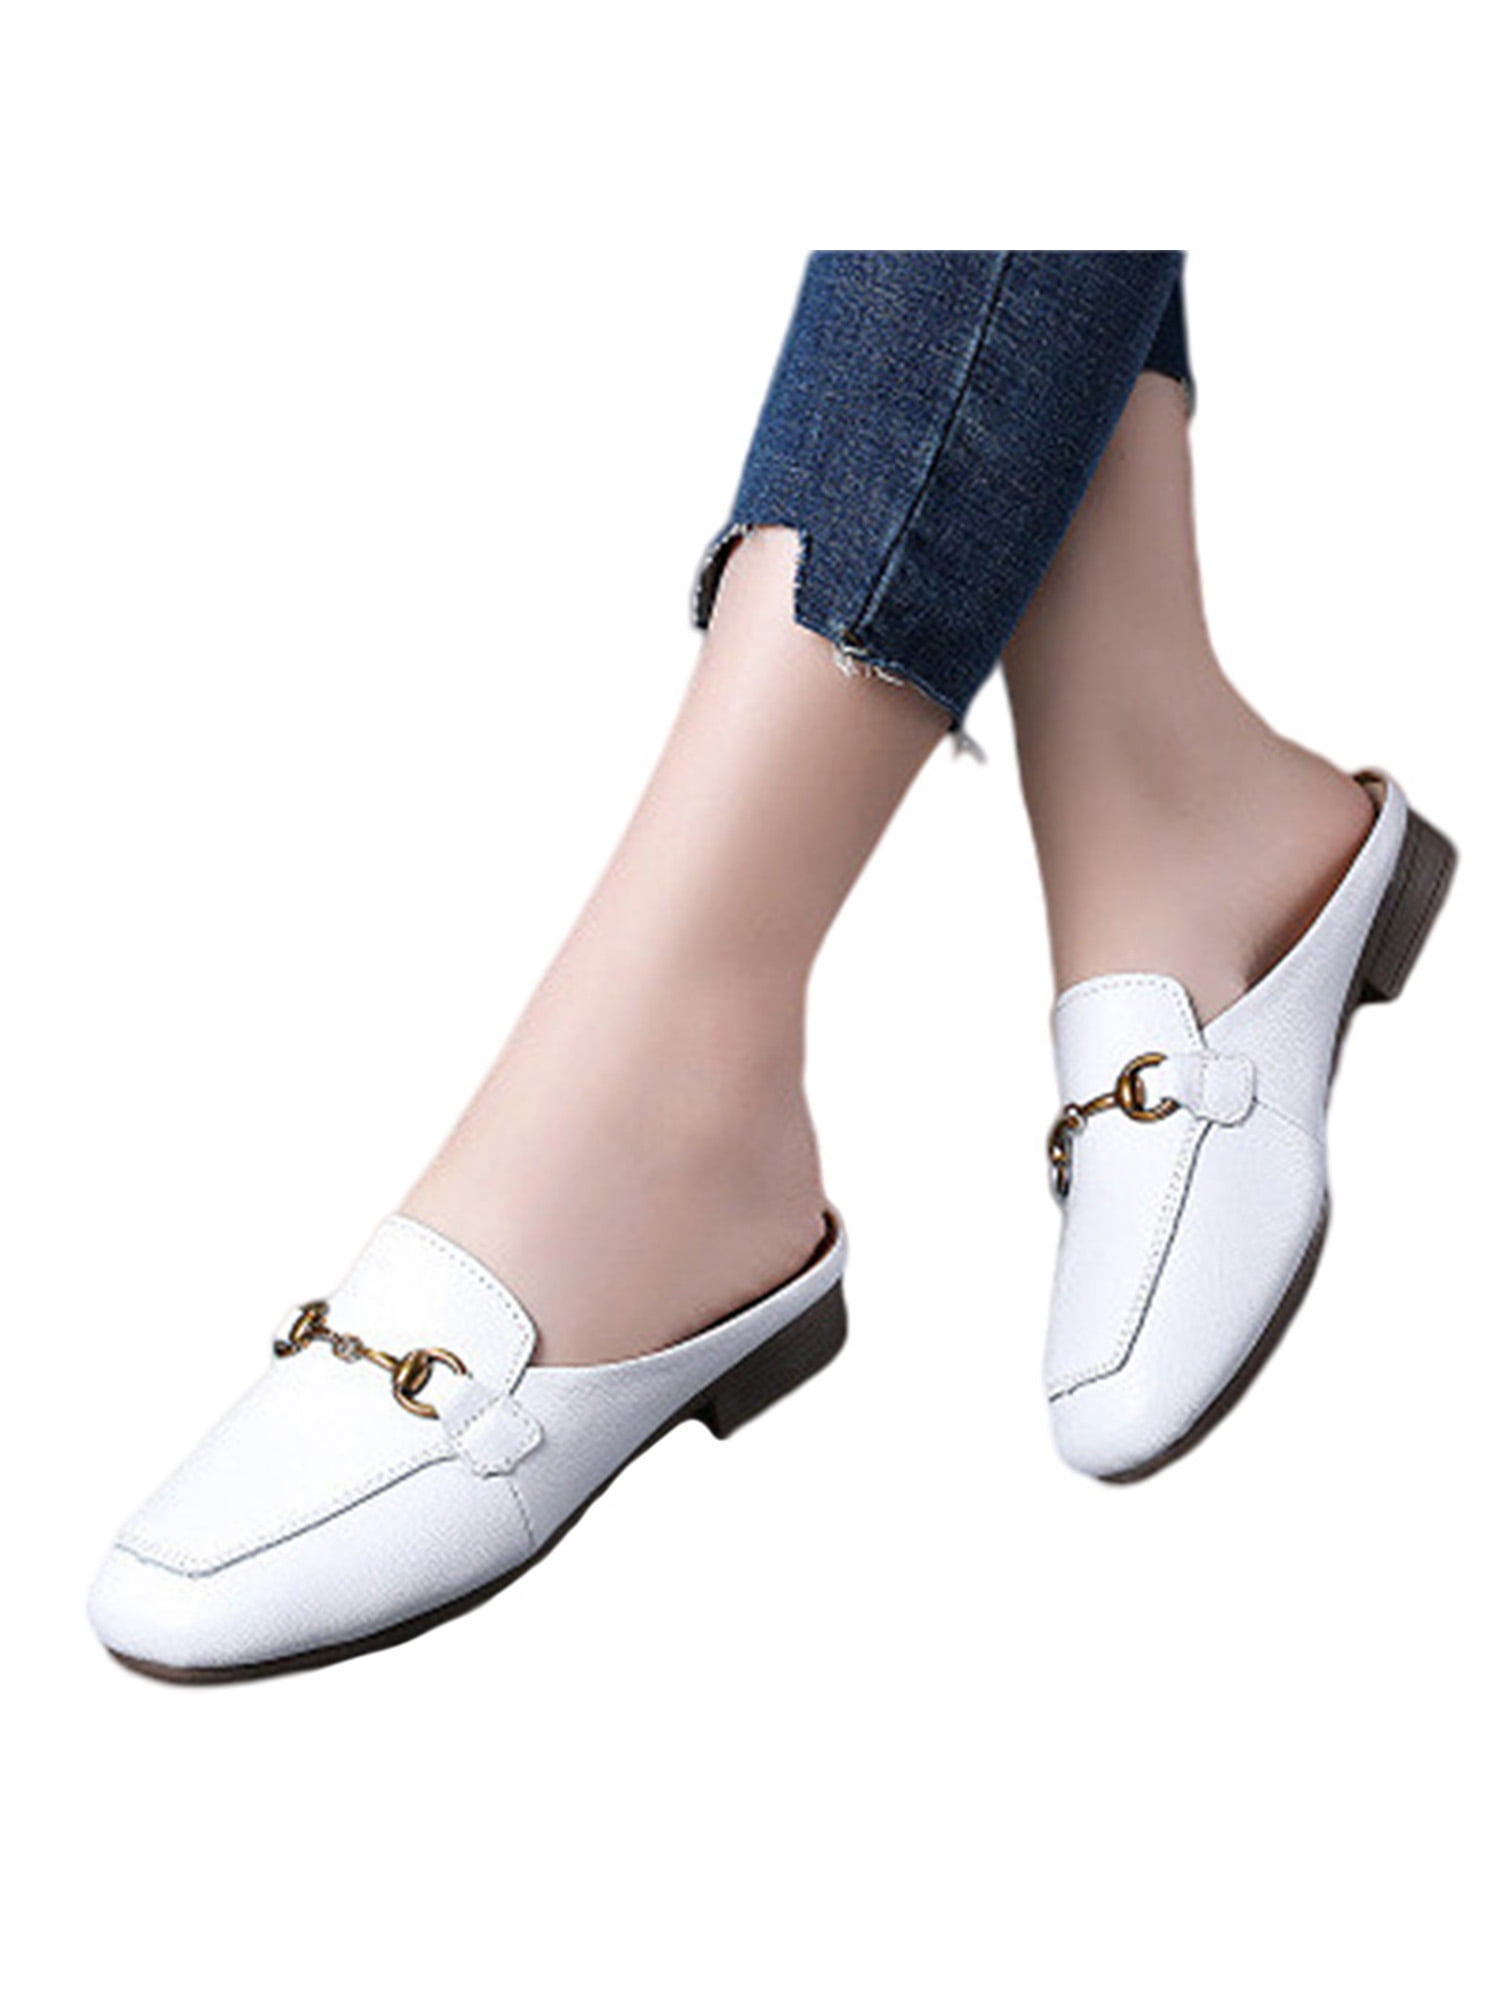 Summer Flat Sandals for Women Chic Three-Color Stitching 2019 New Summer Beach Open Toe Comfortable Non-slip Wear Resistant Shopping Appointment Garden Walking